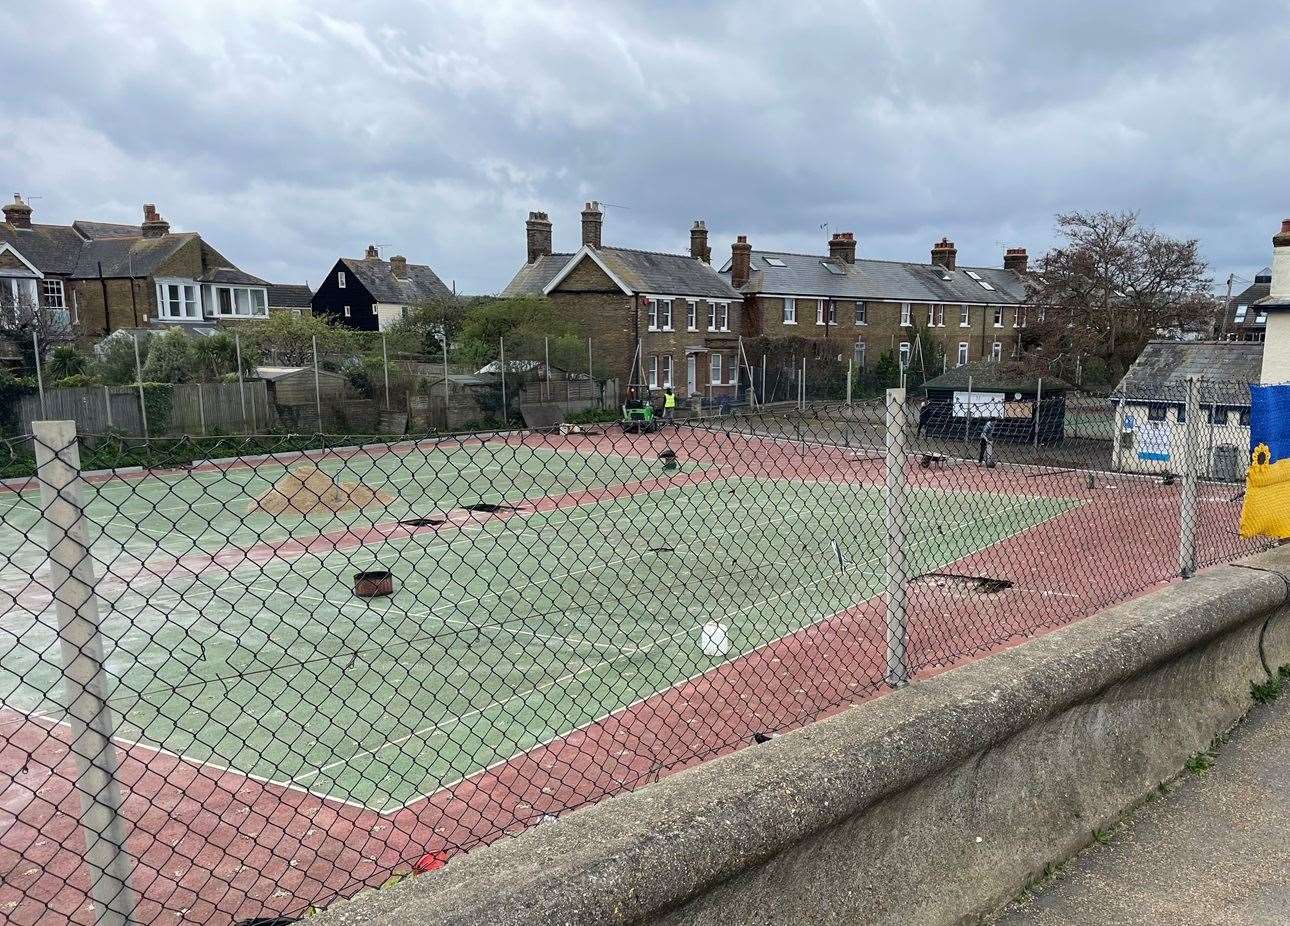 Once complete it is hoped the new courts will attract more people into tennis. Picture: Canterbury City Council